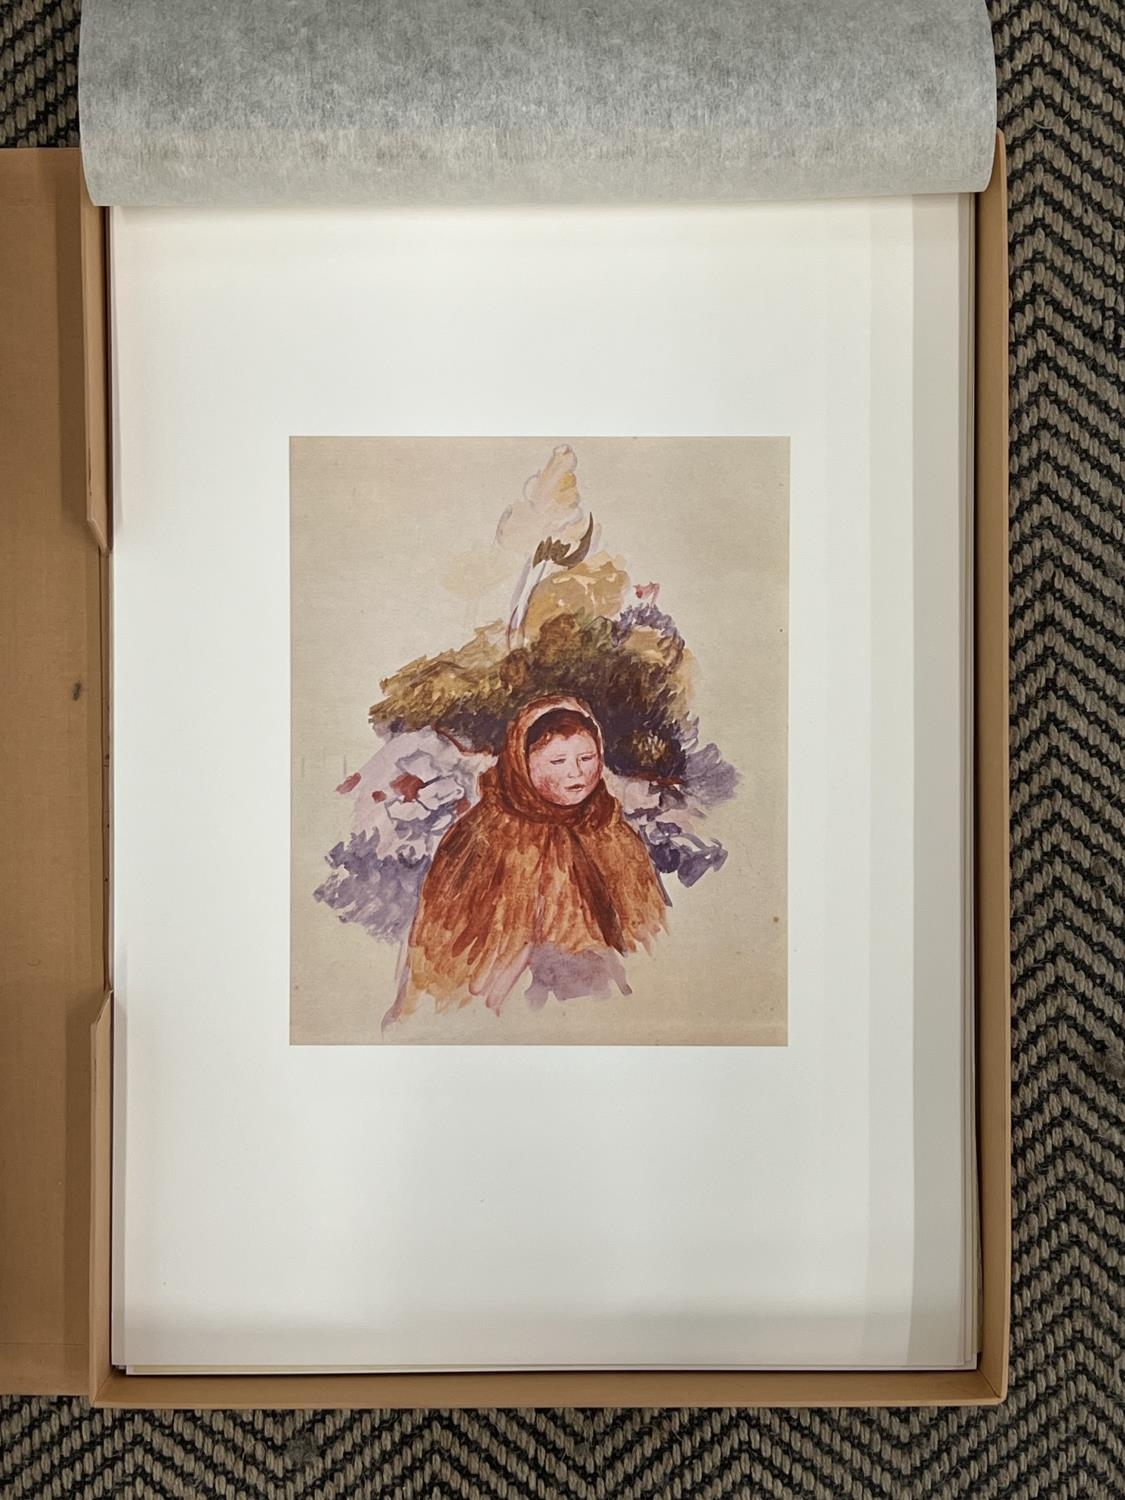 AFTER PIERRE AUGUSTE RENOIR, a folio of 24 off-set lithographs printed by Cartiere Miliani di - Image 17 of 28